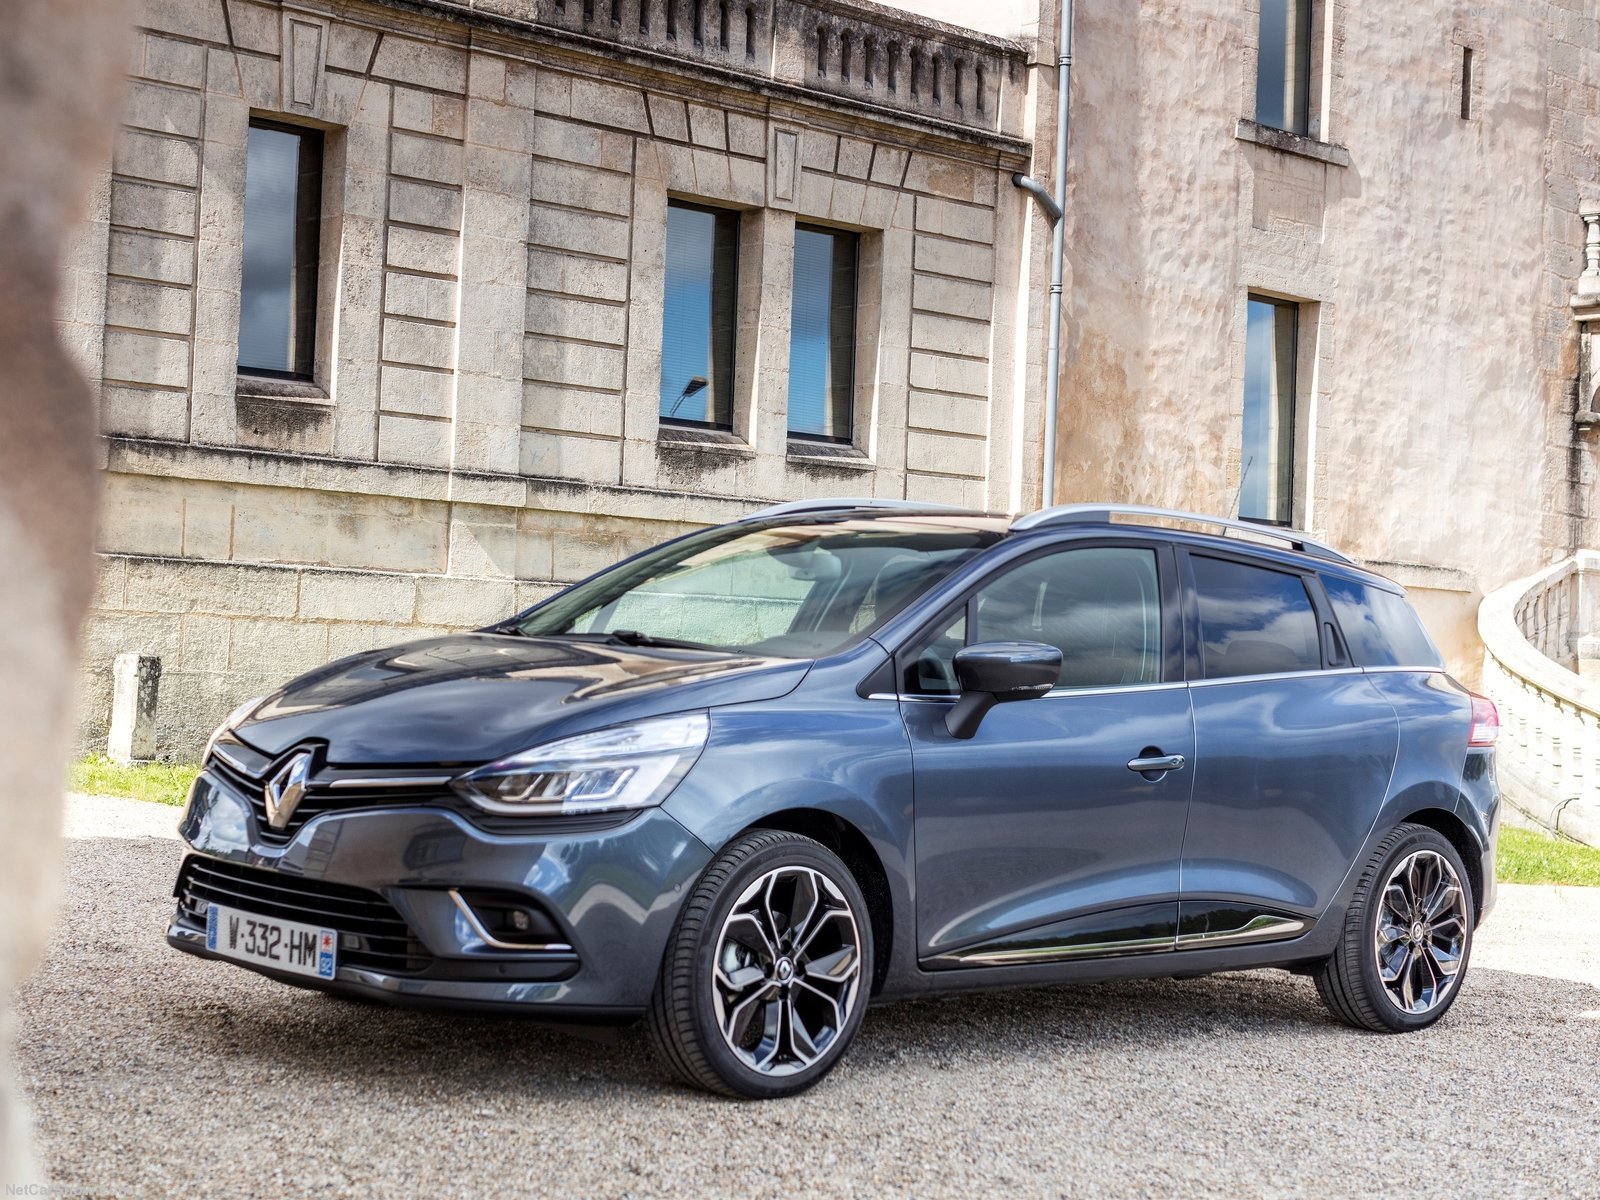 renault, Clio, Cars, French, 2016 Wallpaper